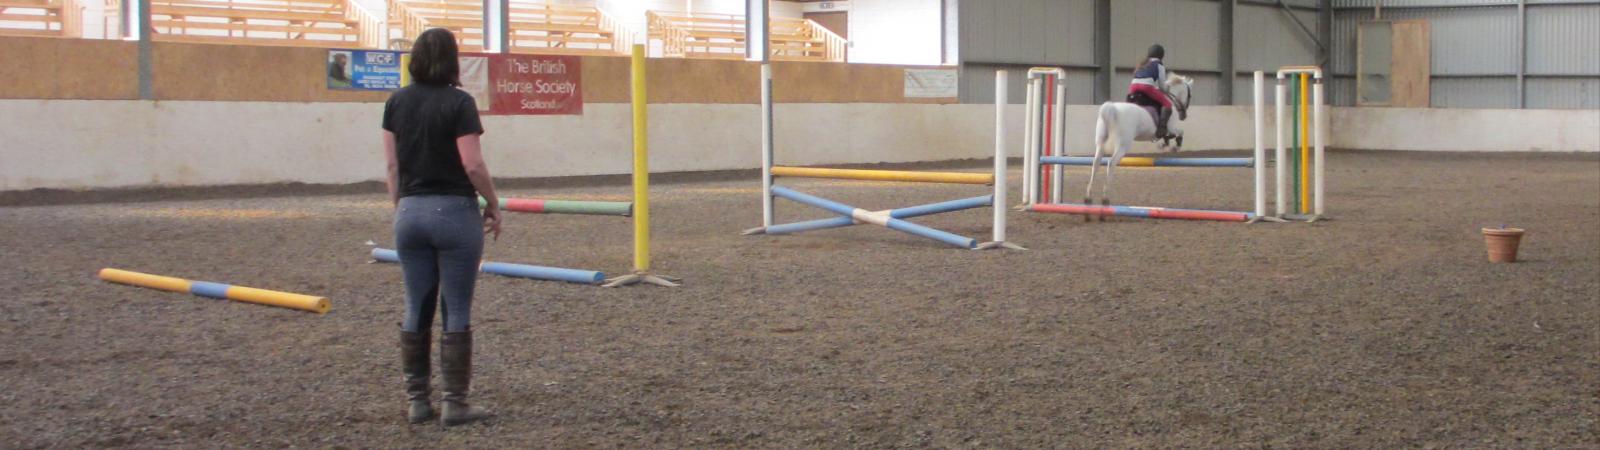 Jumping lesson at Barstobrick Indoor Arena